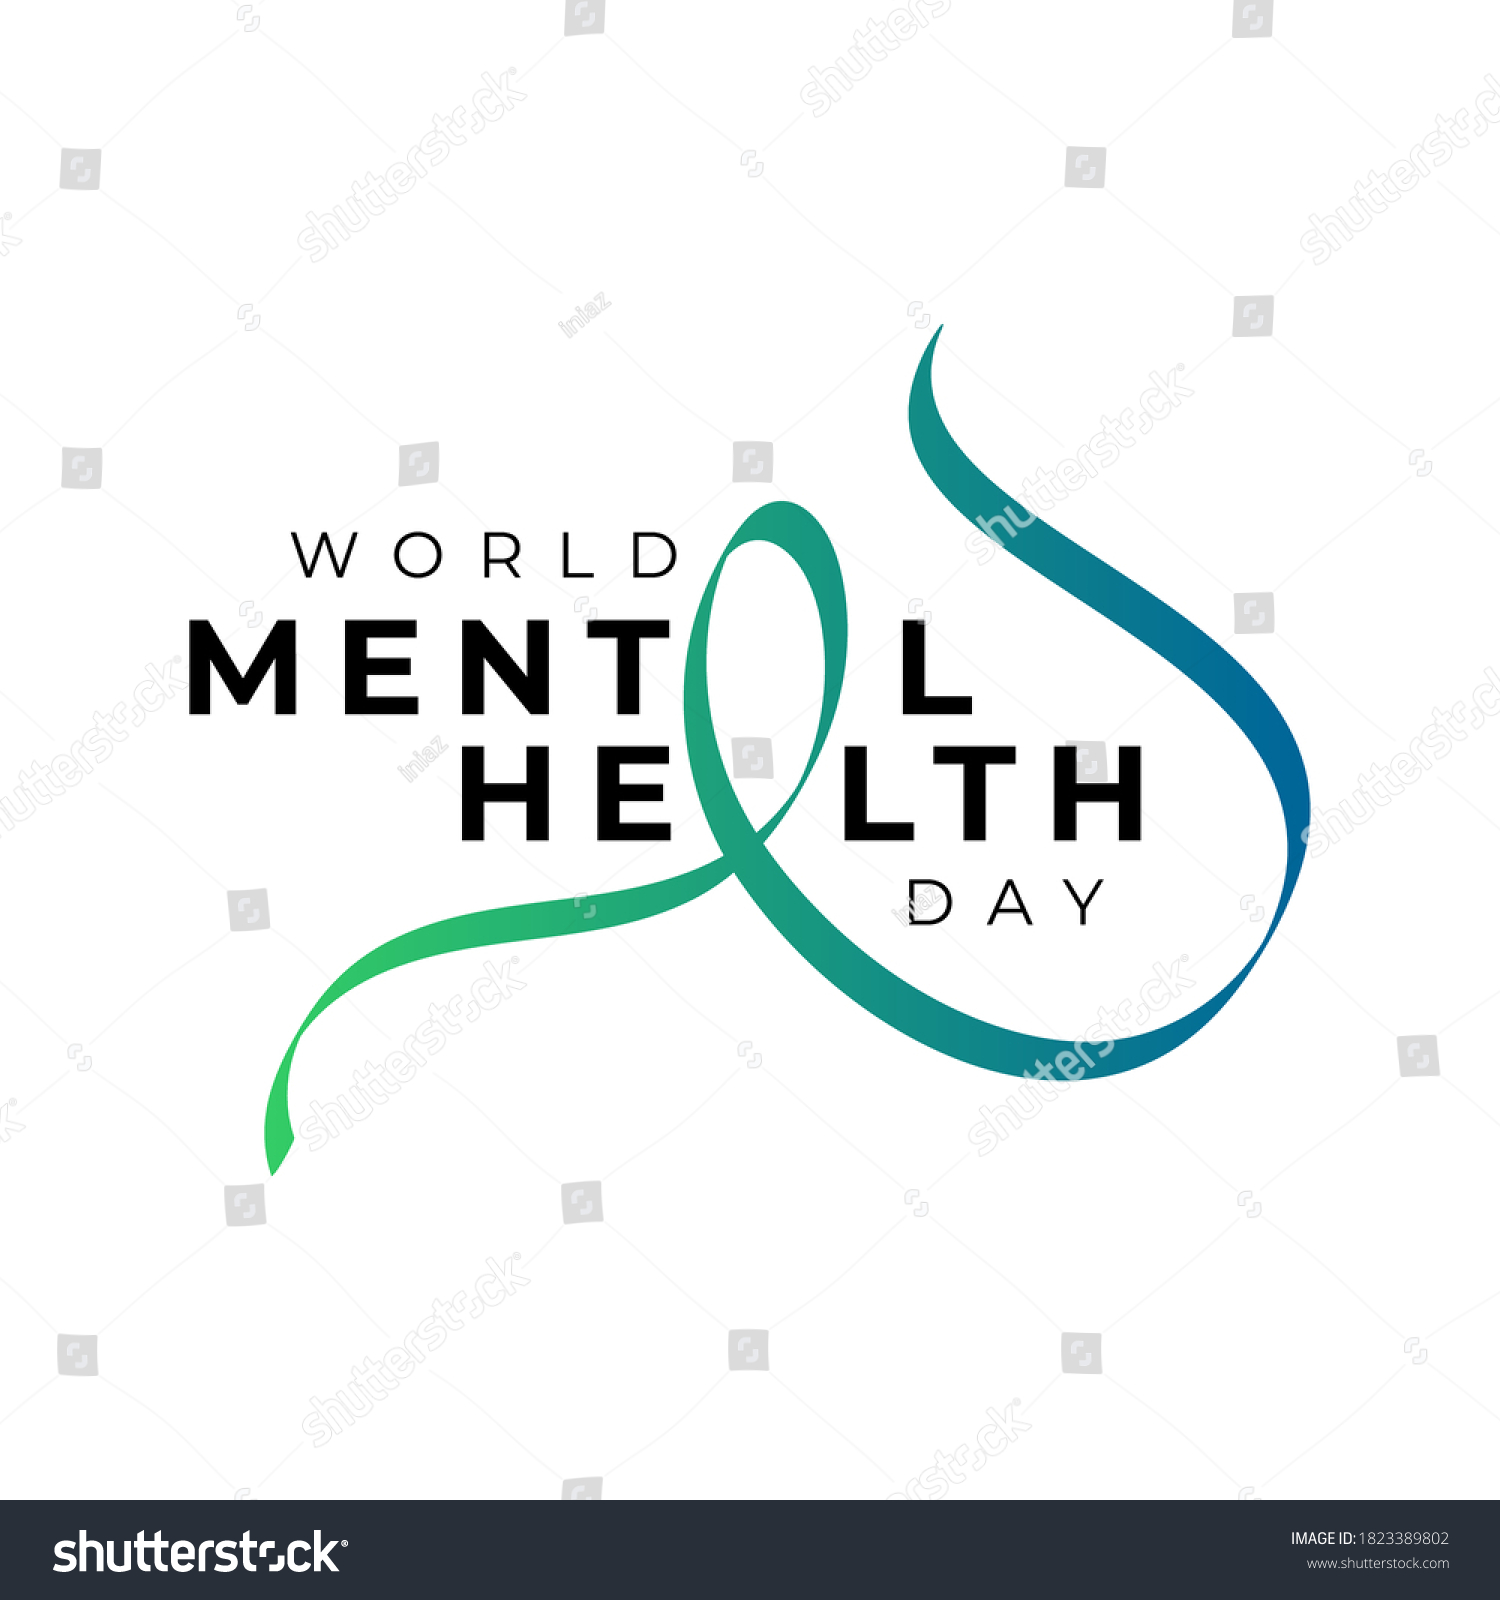 Design for World mental health day. Annual campaign. Raising awareness of mental health. Control and protection. Medical health care design. #1823389802